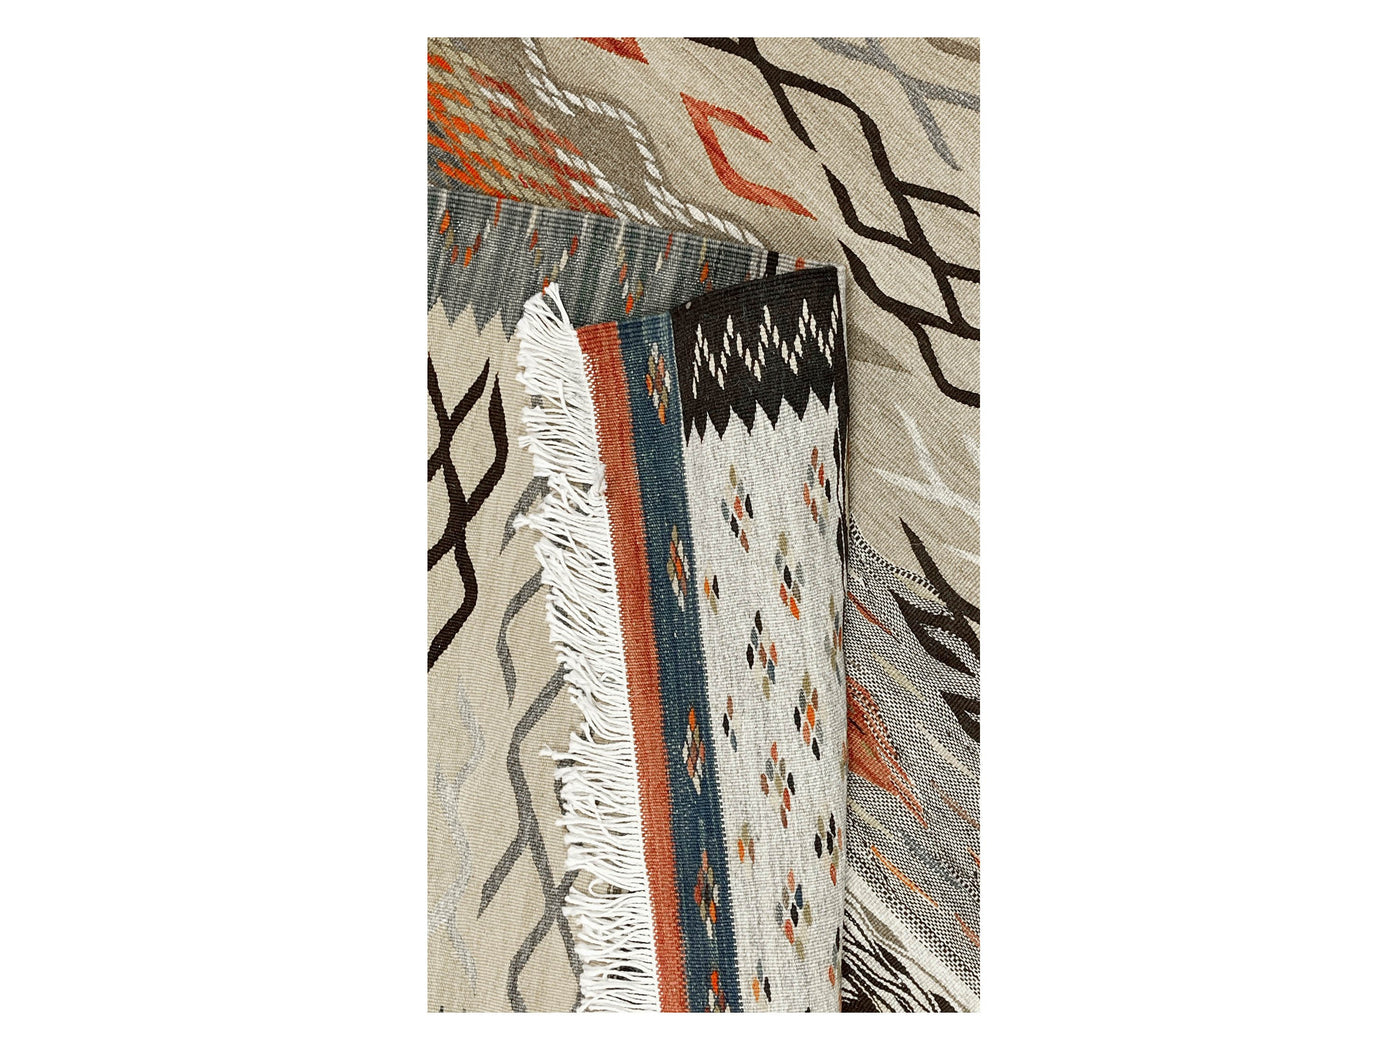 Custom Moroccan Rug -  Azenzer Taznakht Morocco Collection